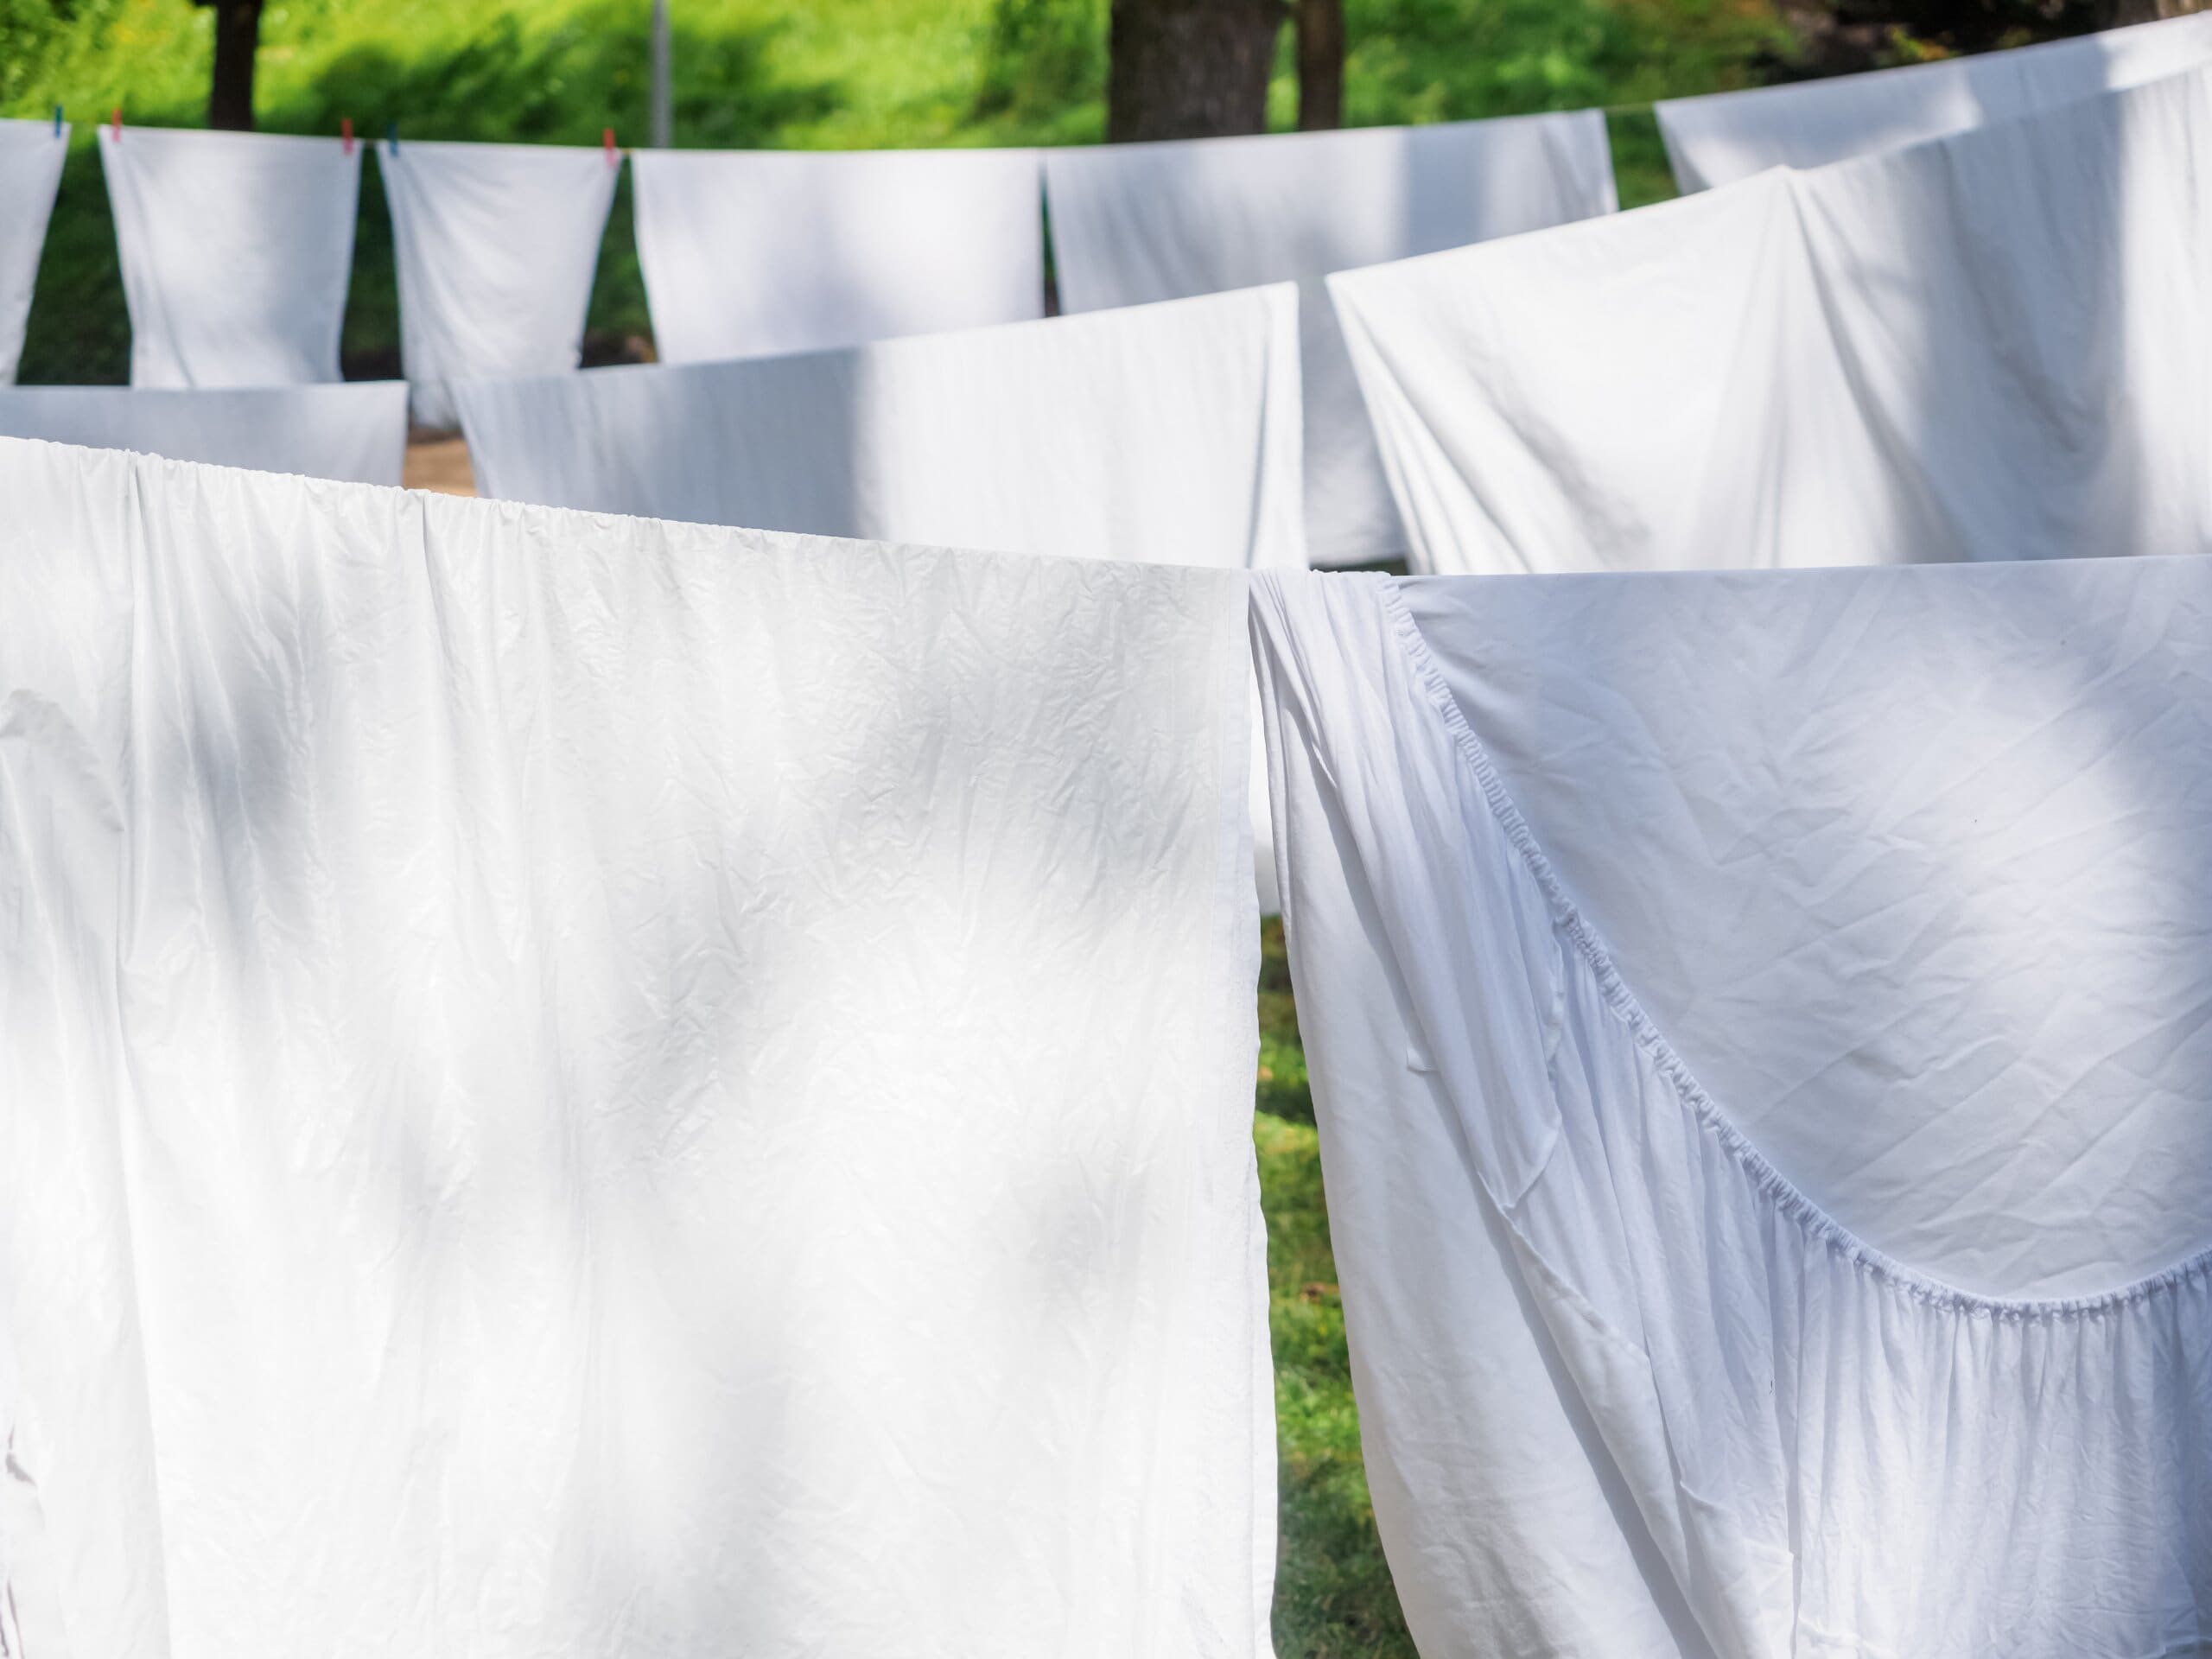 Fresh white bed sheets hanging on a washing line outside.